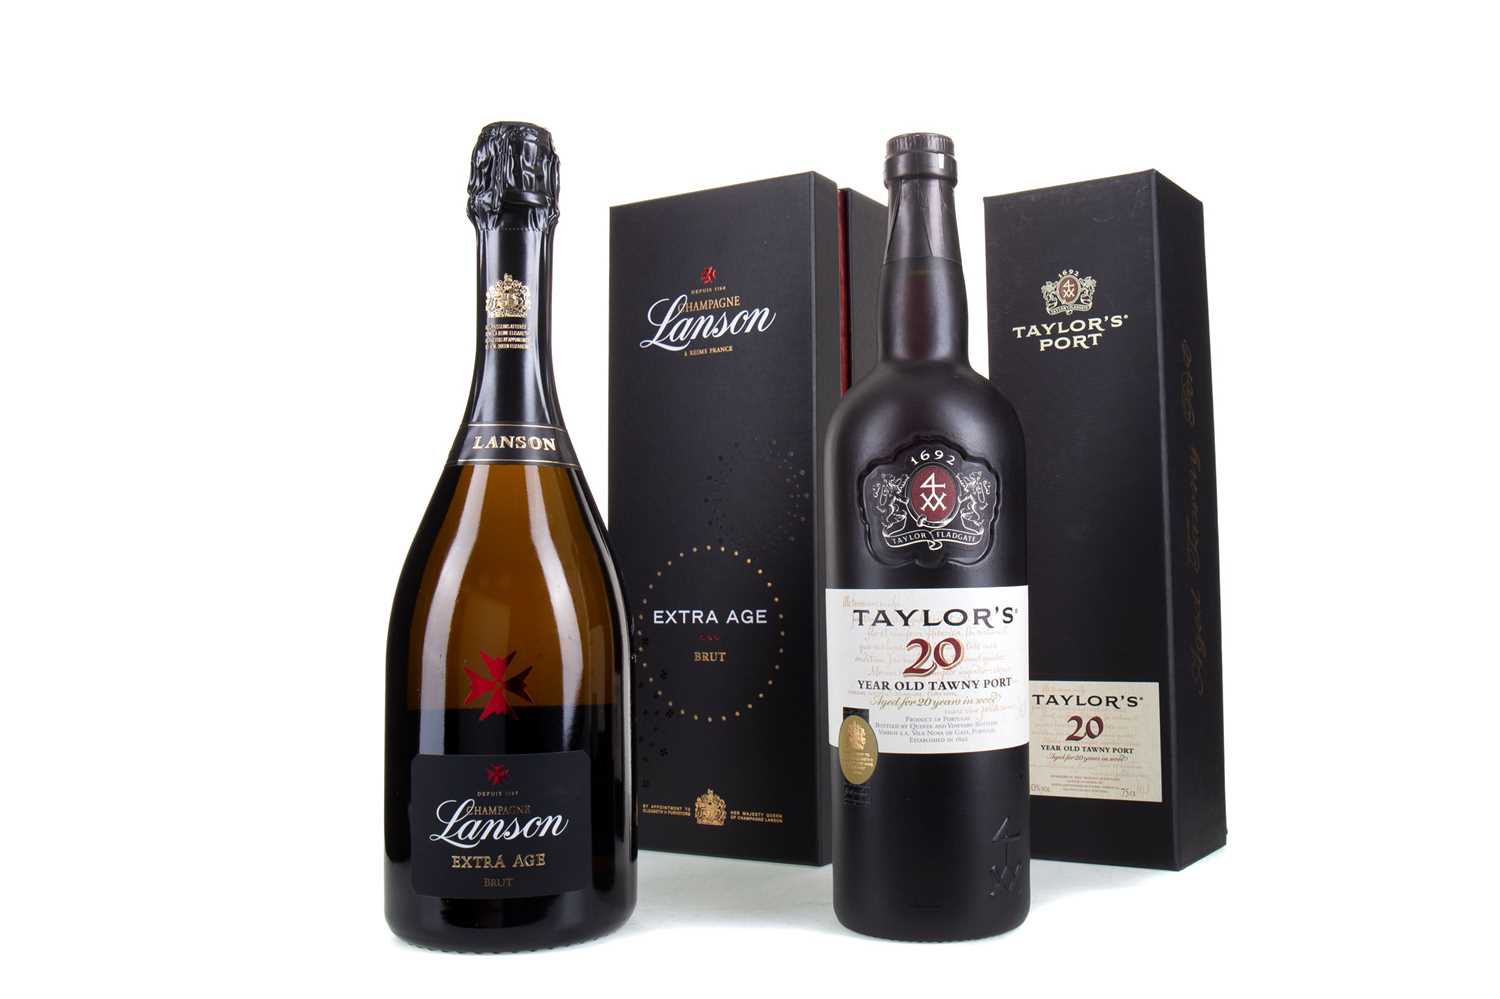 Lot 68 - TAYLOR'S 20 YEAR OLD TAWNY PORT 75CL AND LANSON EXTRA AGE NV CHAMPAGNE 75CL